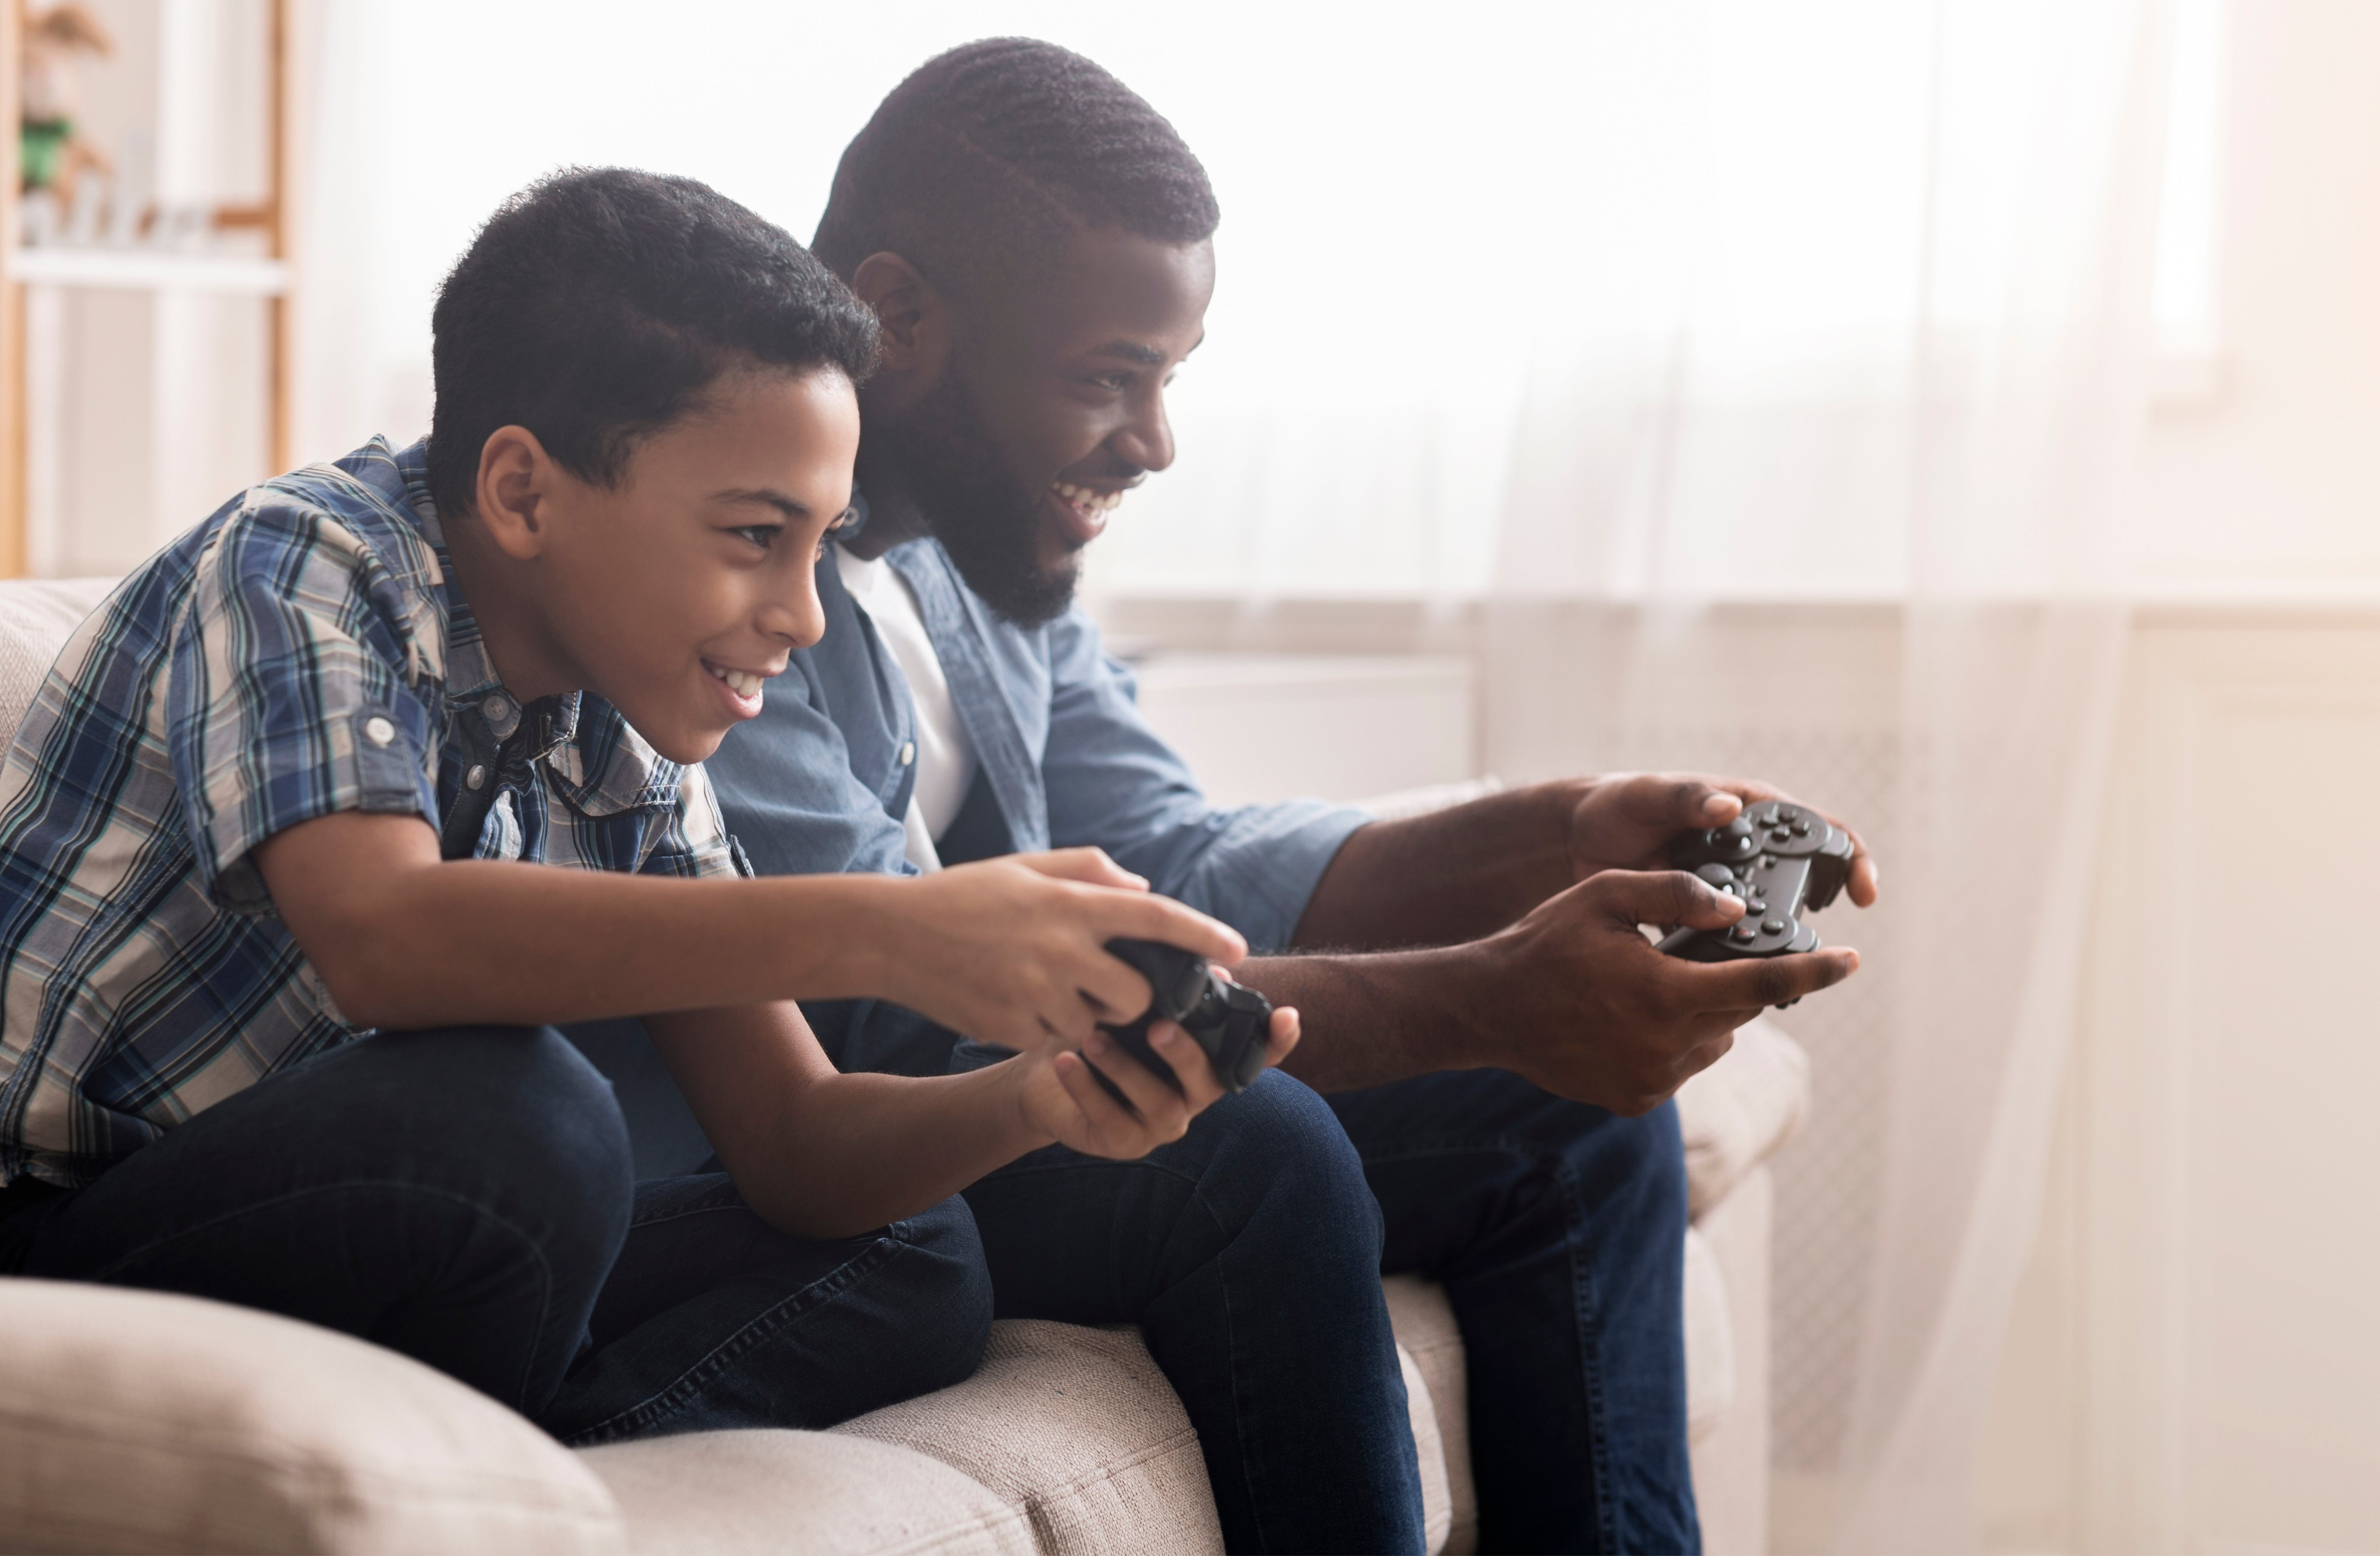 Parents playing five extra hours of video games a week to bond with their  children, poll finds